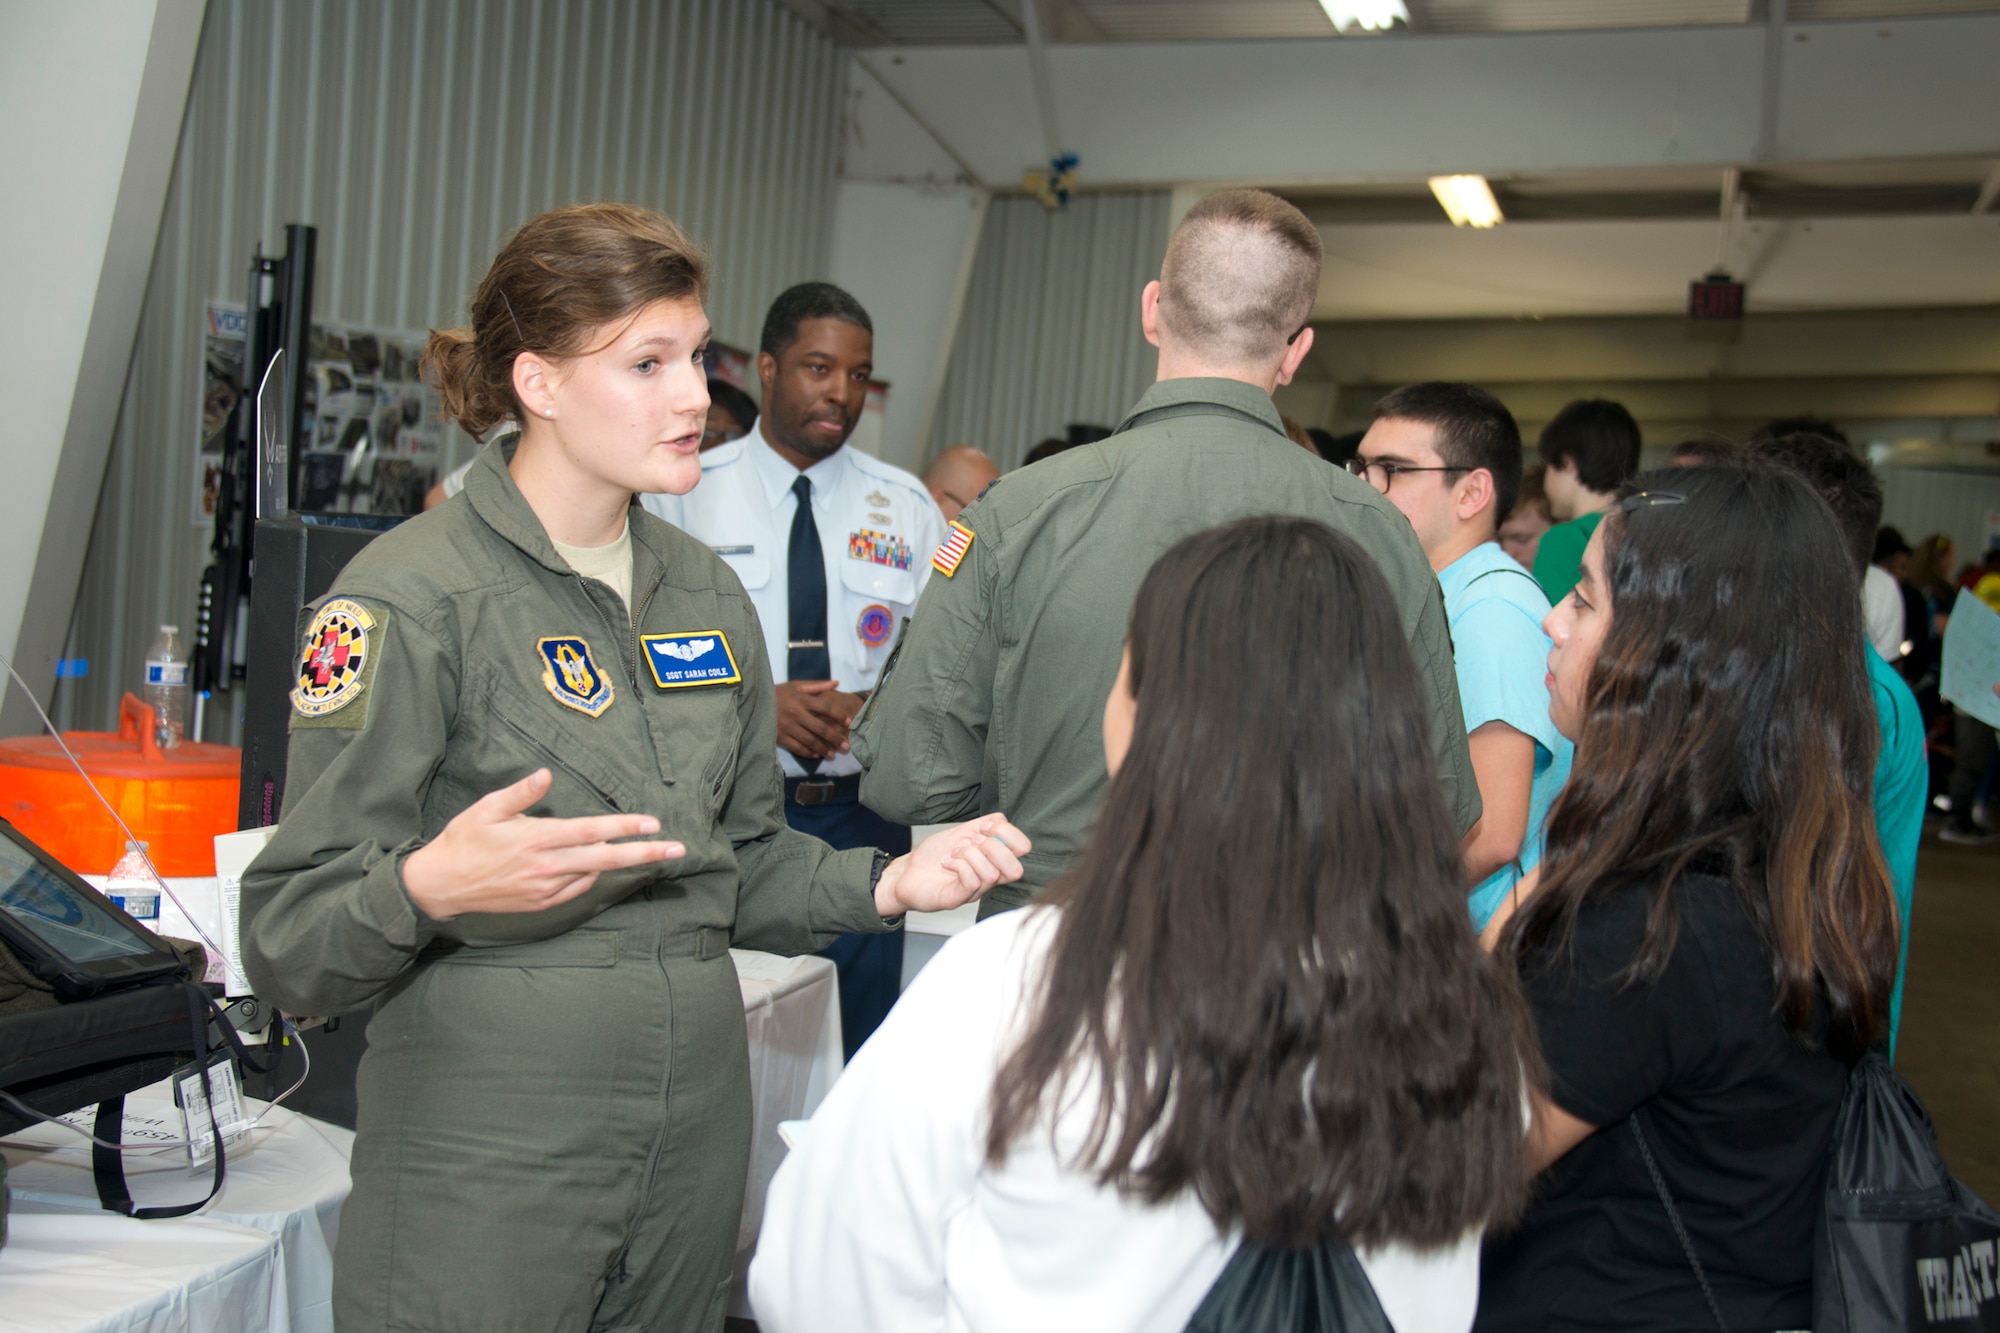 Wing members reach out to more than 1,000 students at career fair